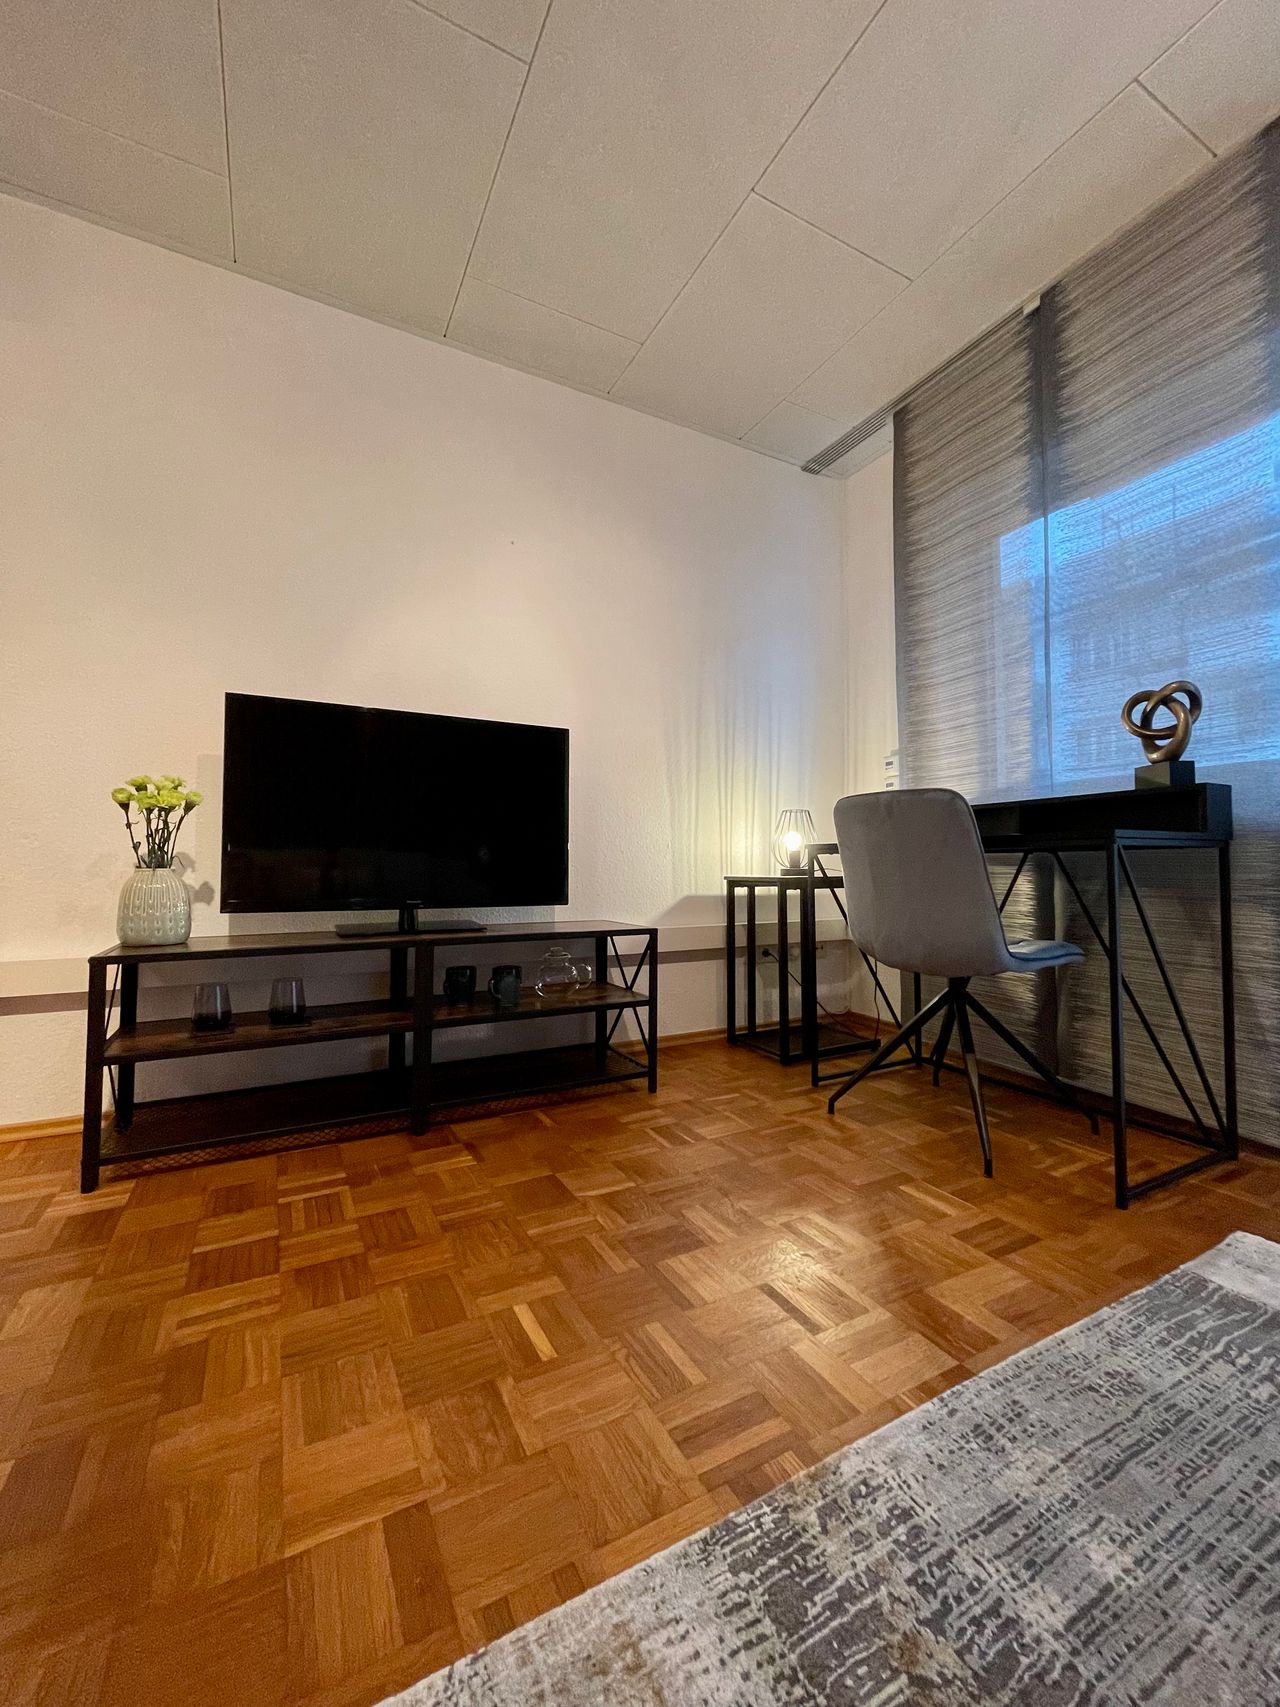 New apartment near city center, air conditioning, high speed internet and XXL bed